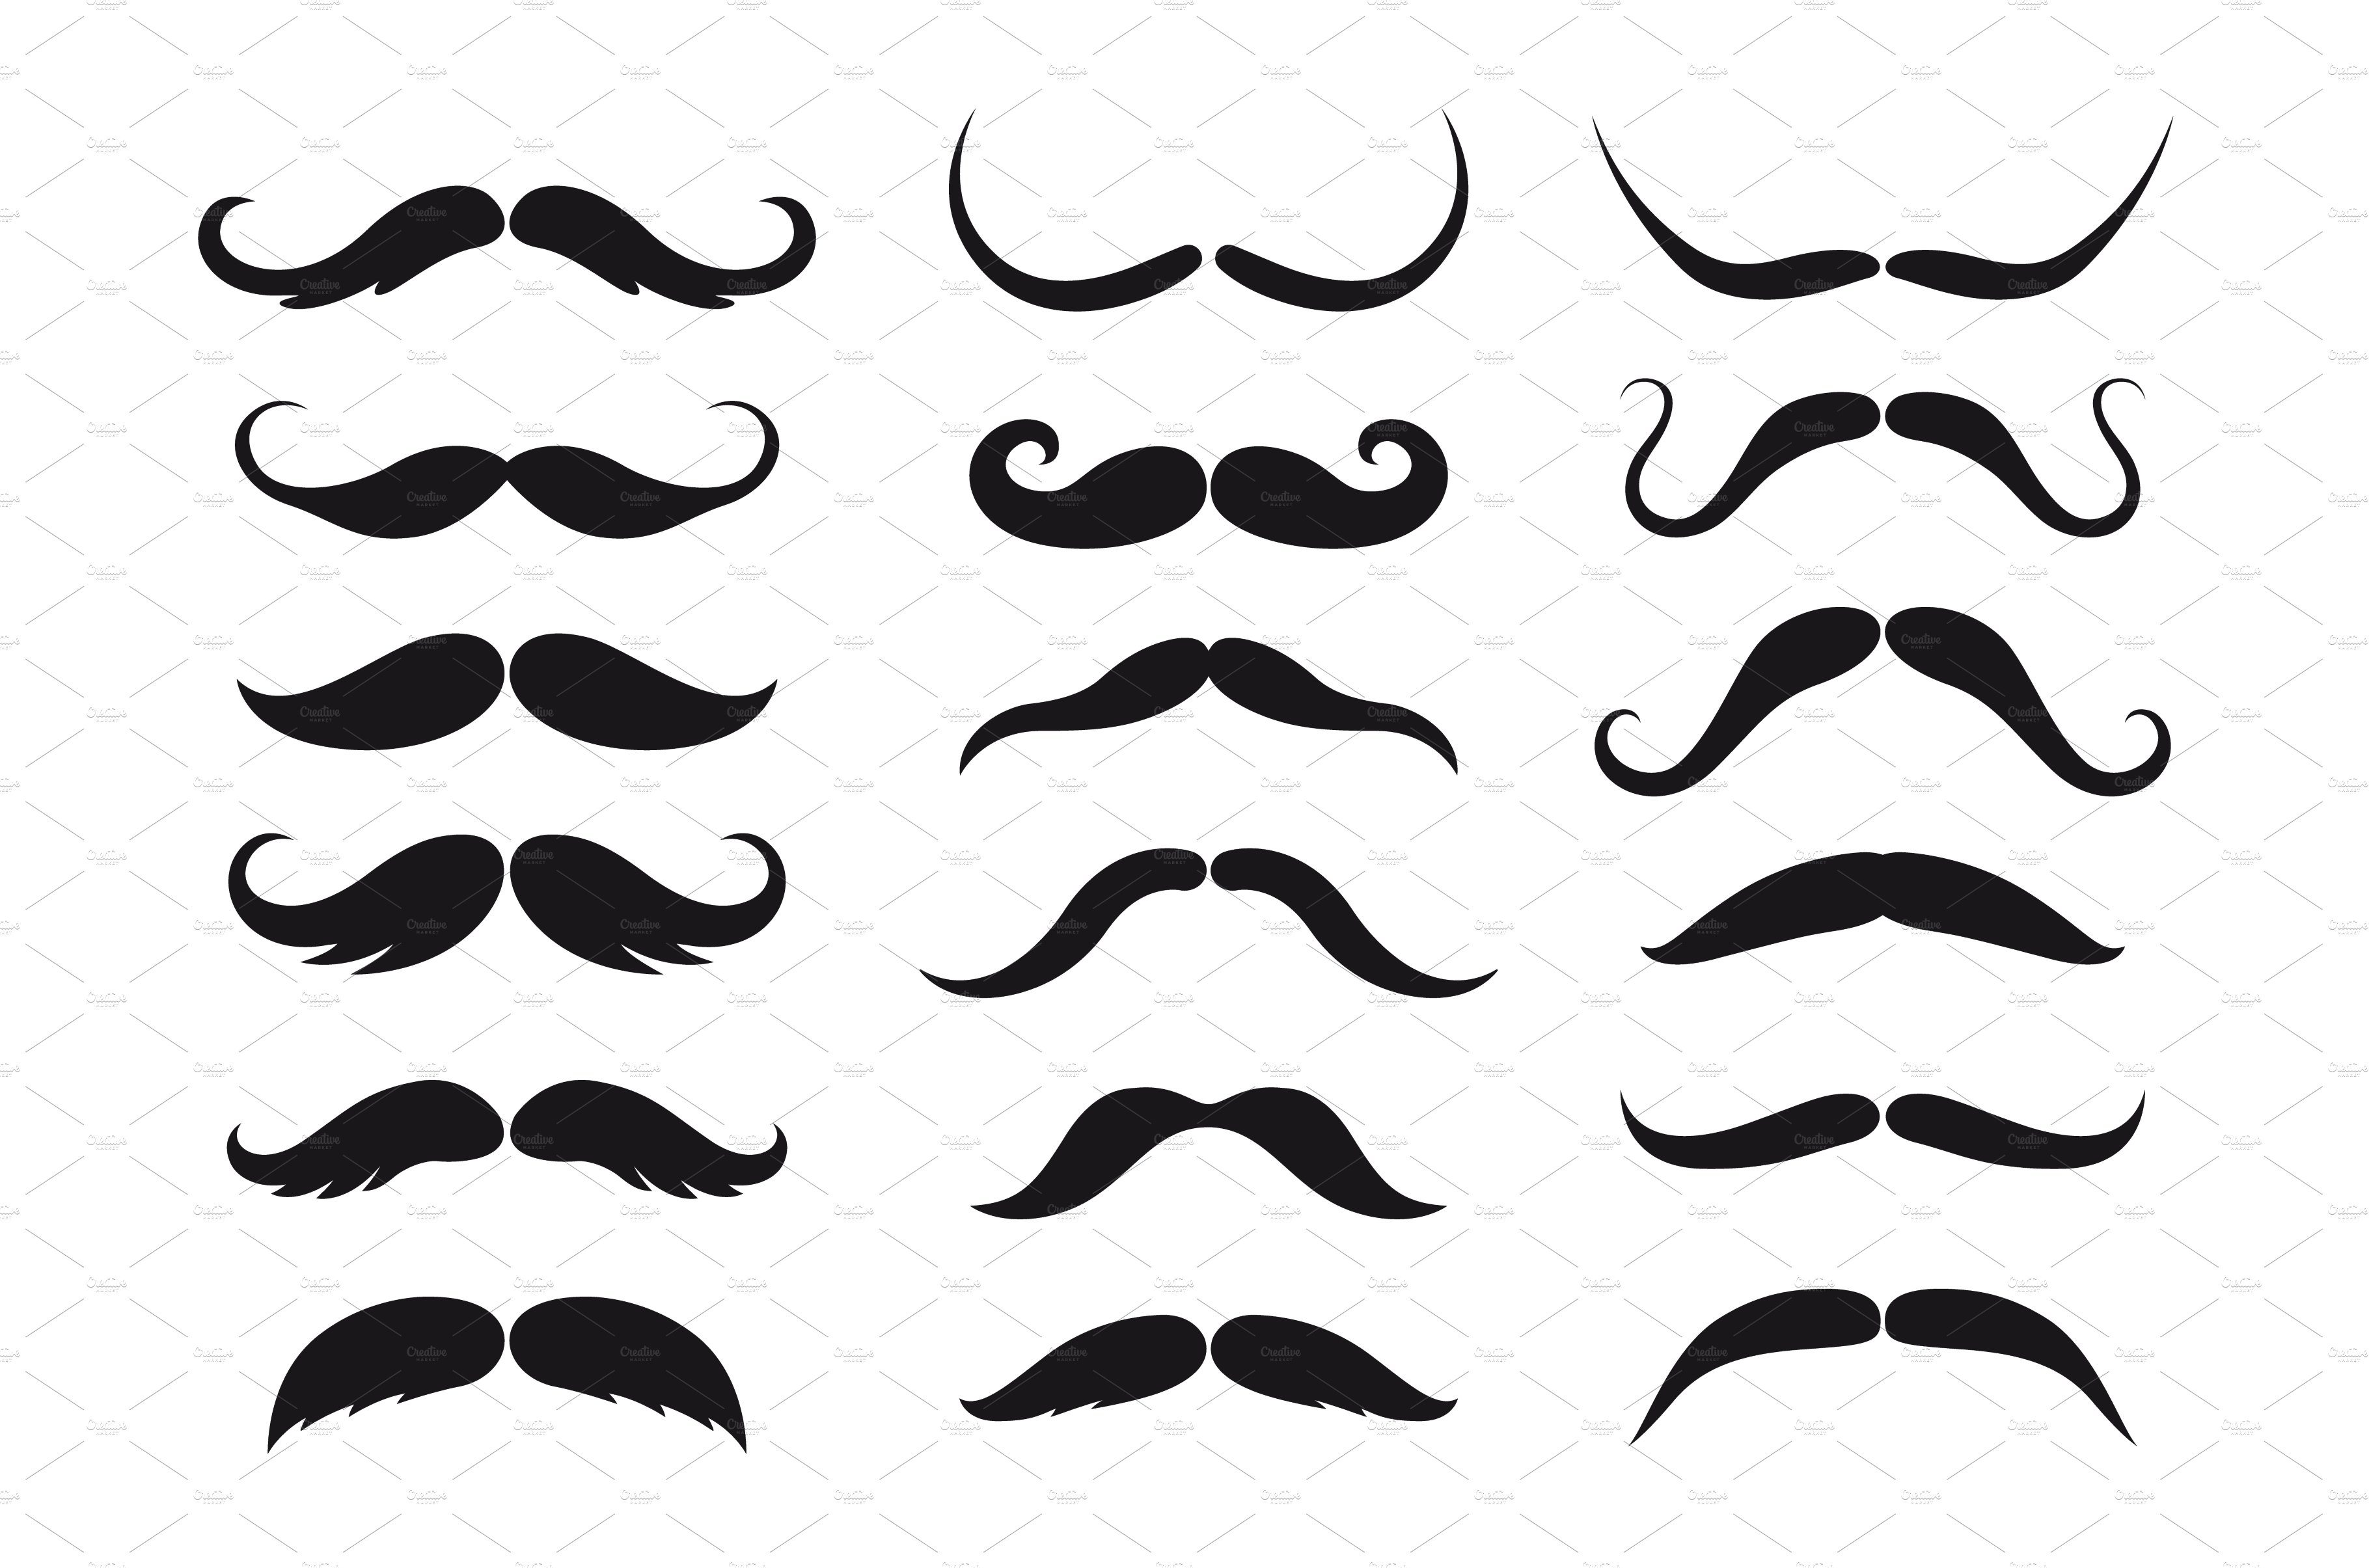 Mustaches vector black silhouettes cover image.